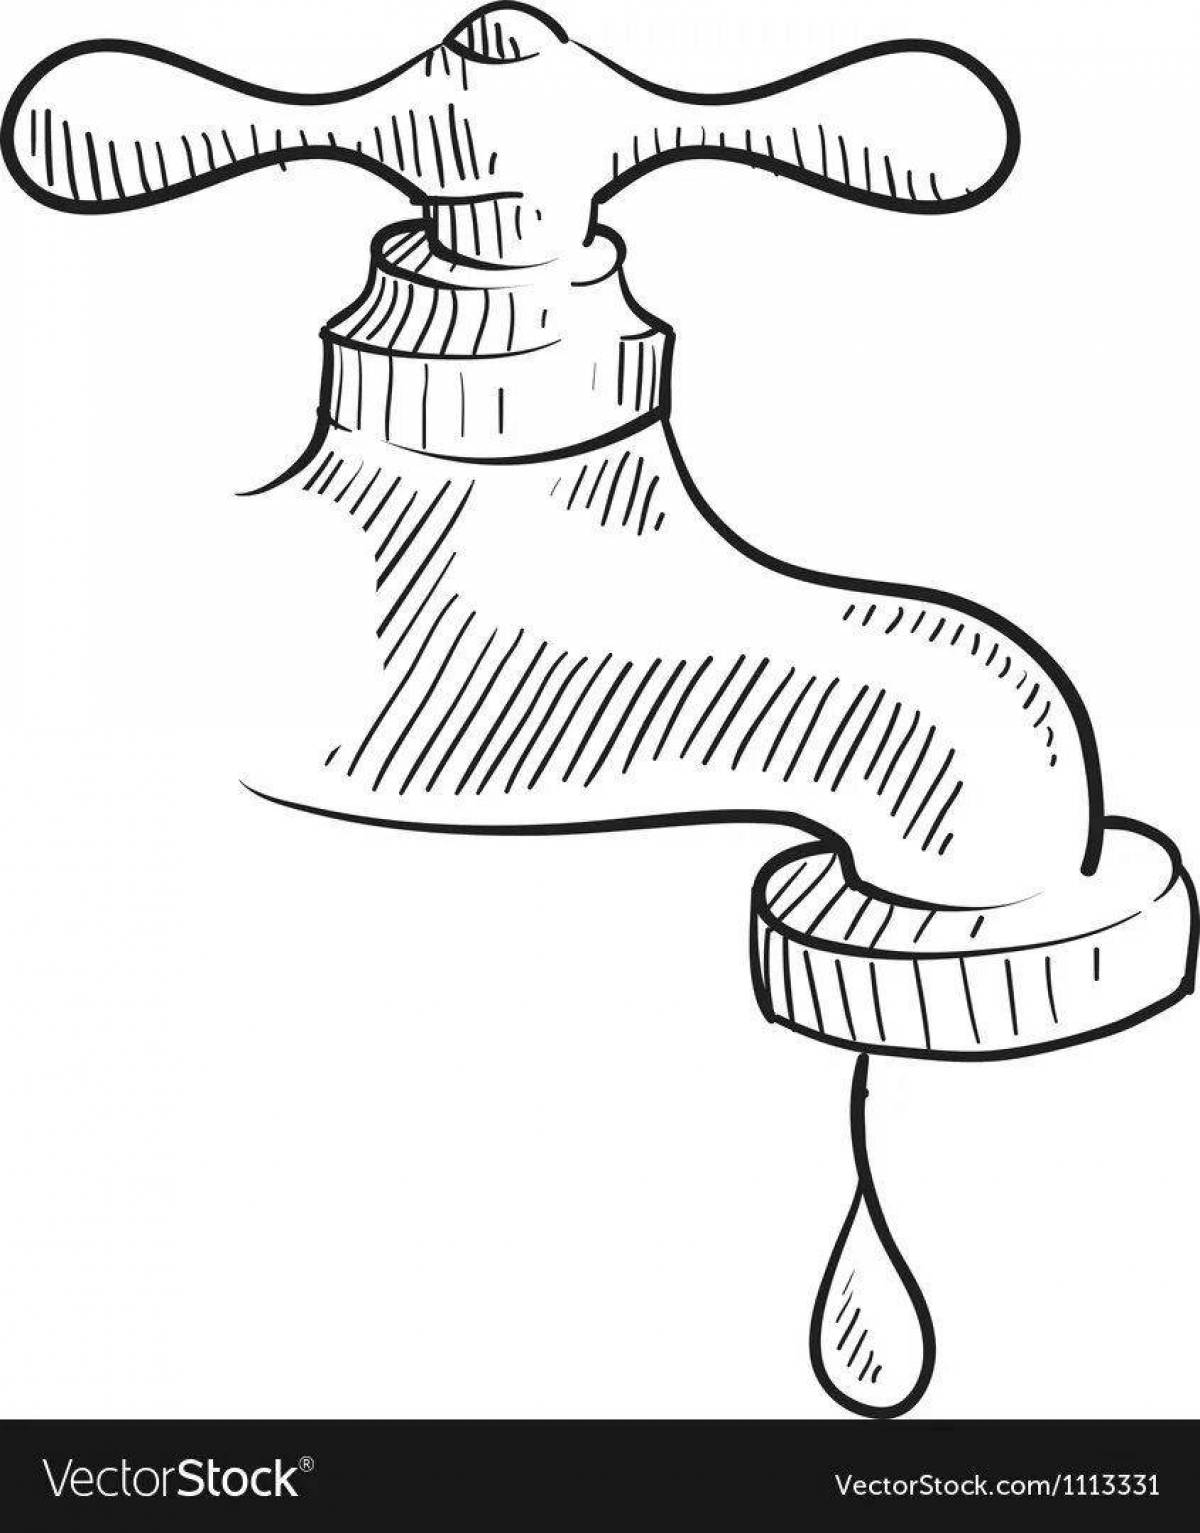 Vibrant water faucet coloring page for kids